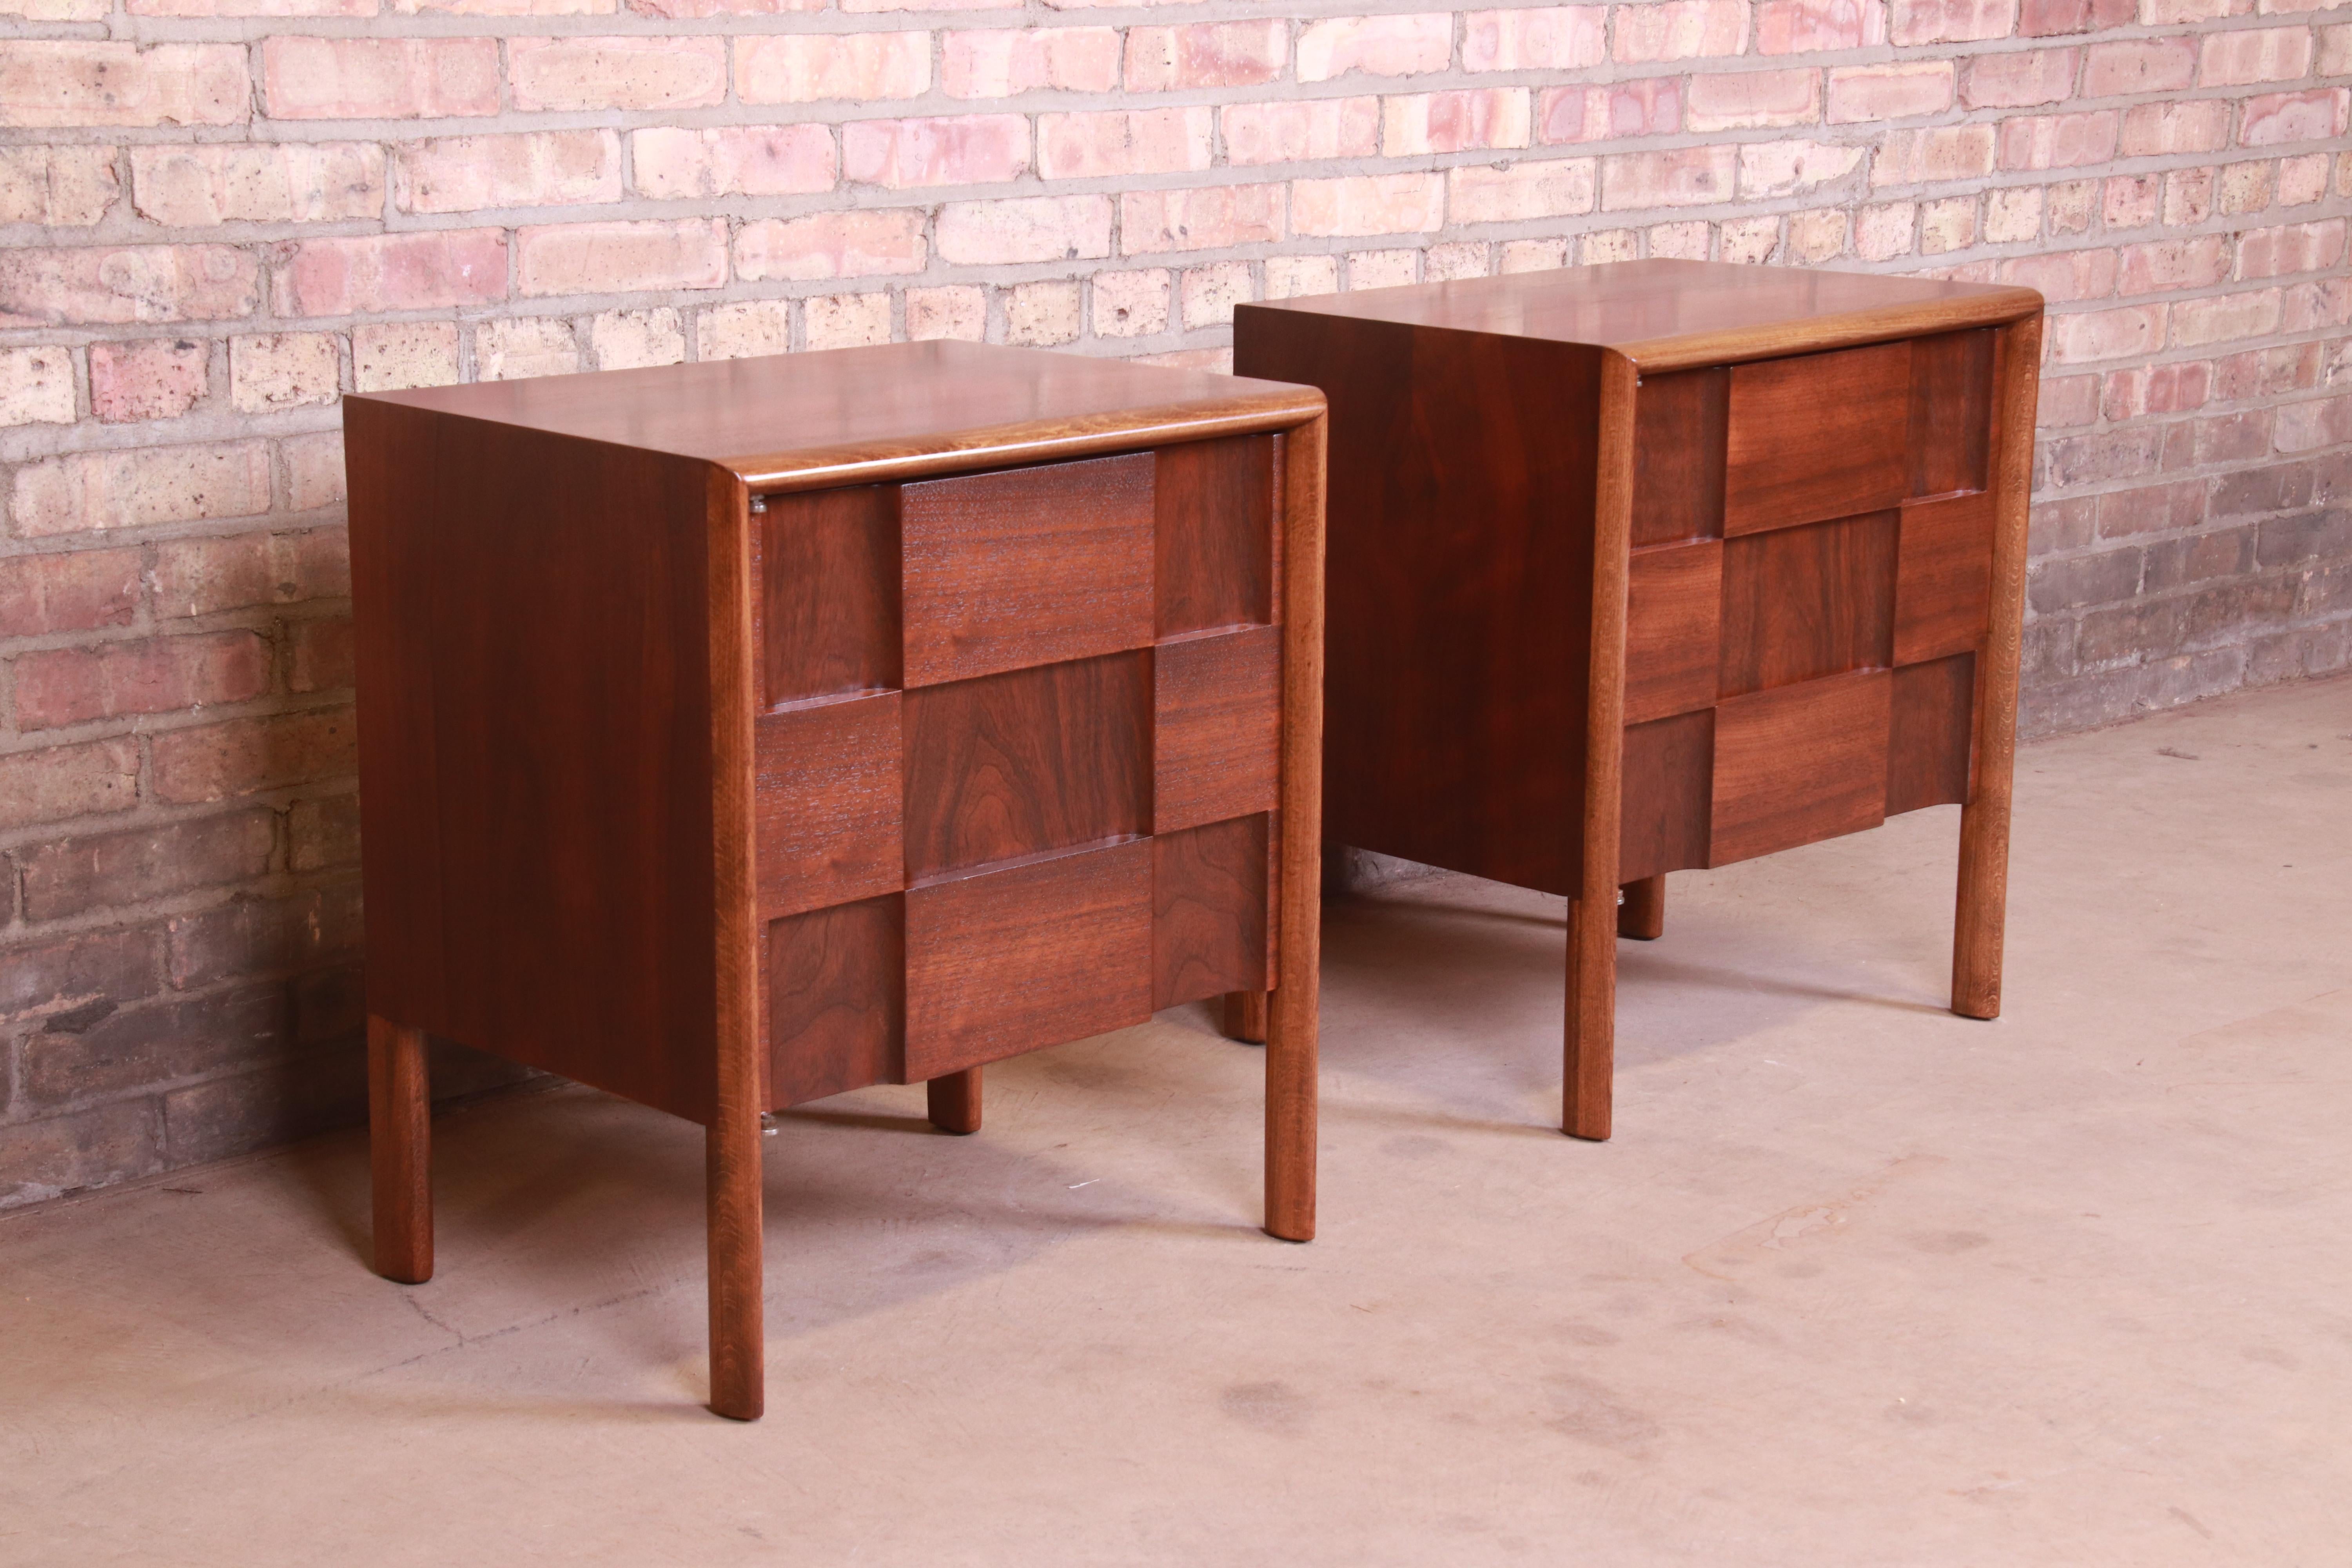 Mid-20th Century Edmond Spence Swedish Modern Sculpted Walnut Nightstands, Newly Refinished